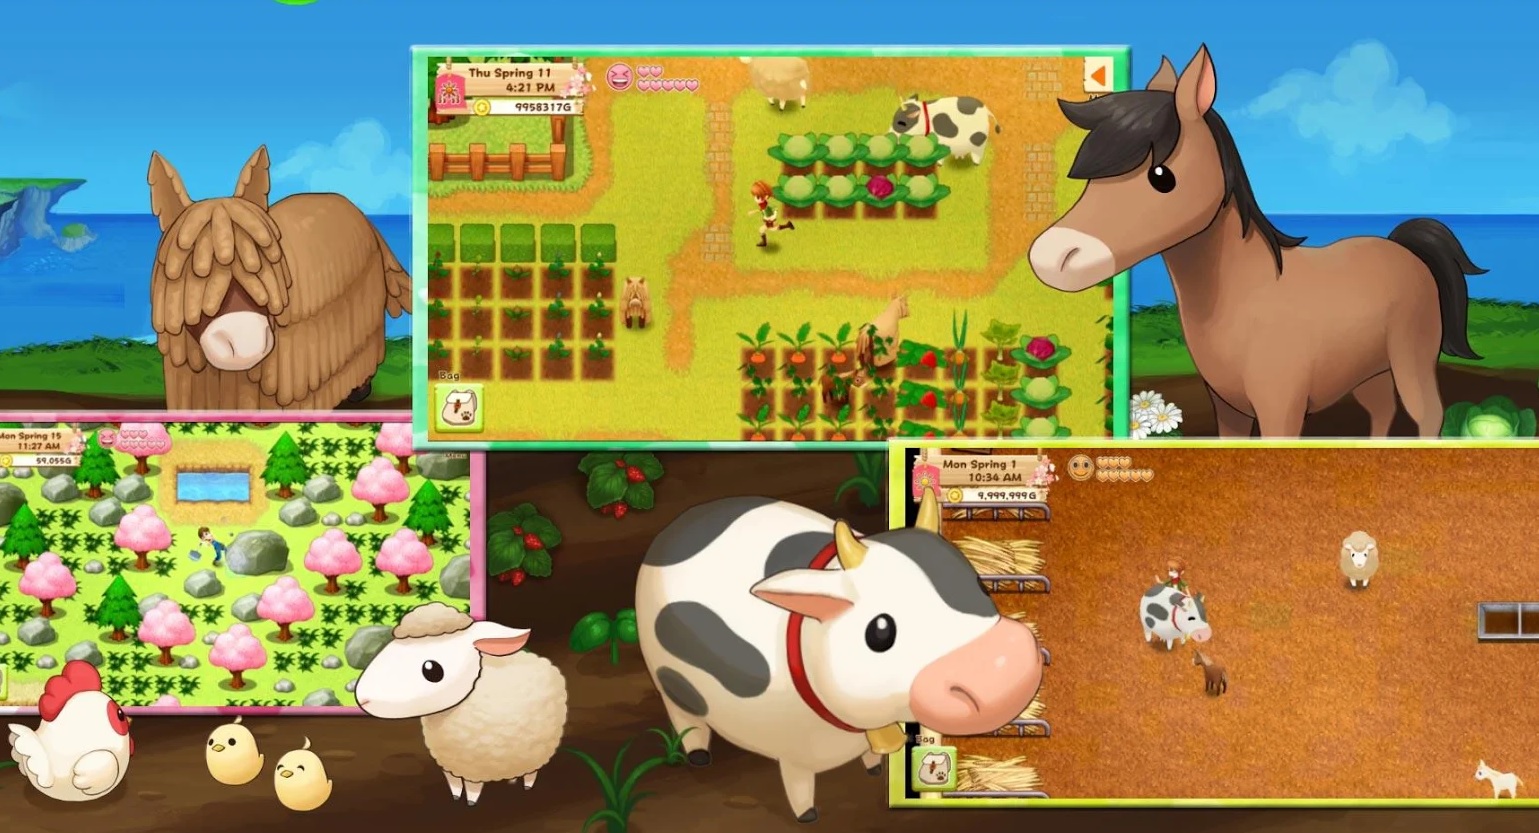 Screenshots from Harvest Moon Light of Hope on Android.